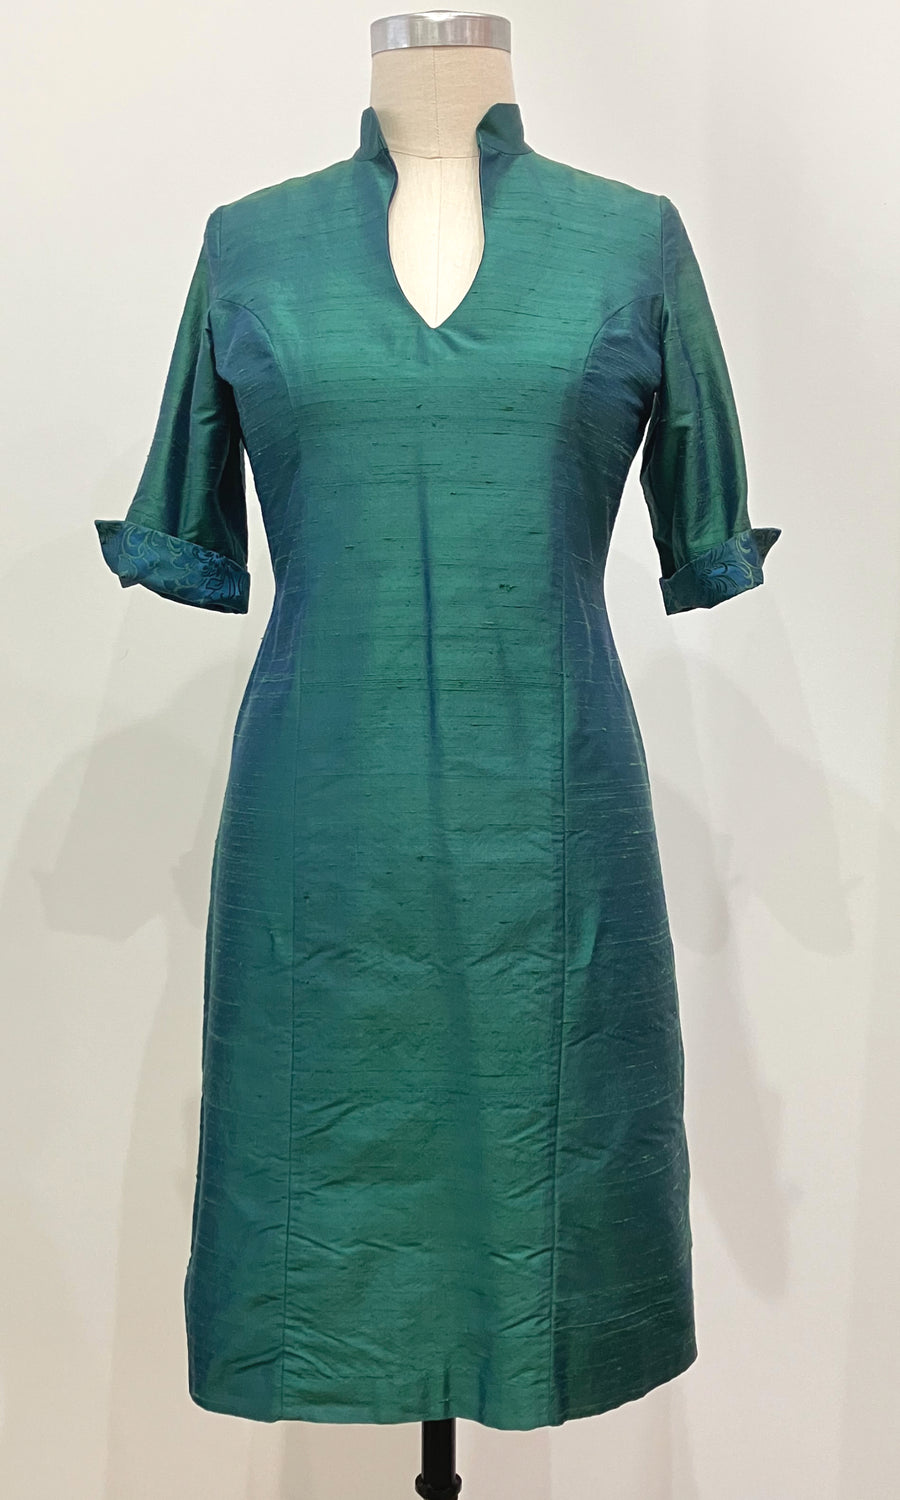 Teal Mandarin-Collar Dress with Sleeves, size Large